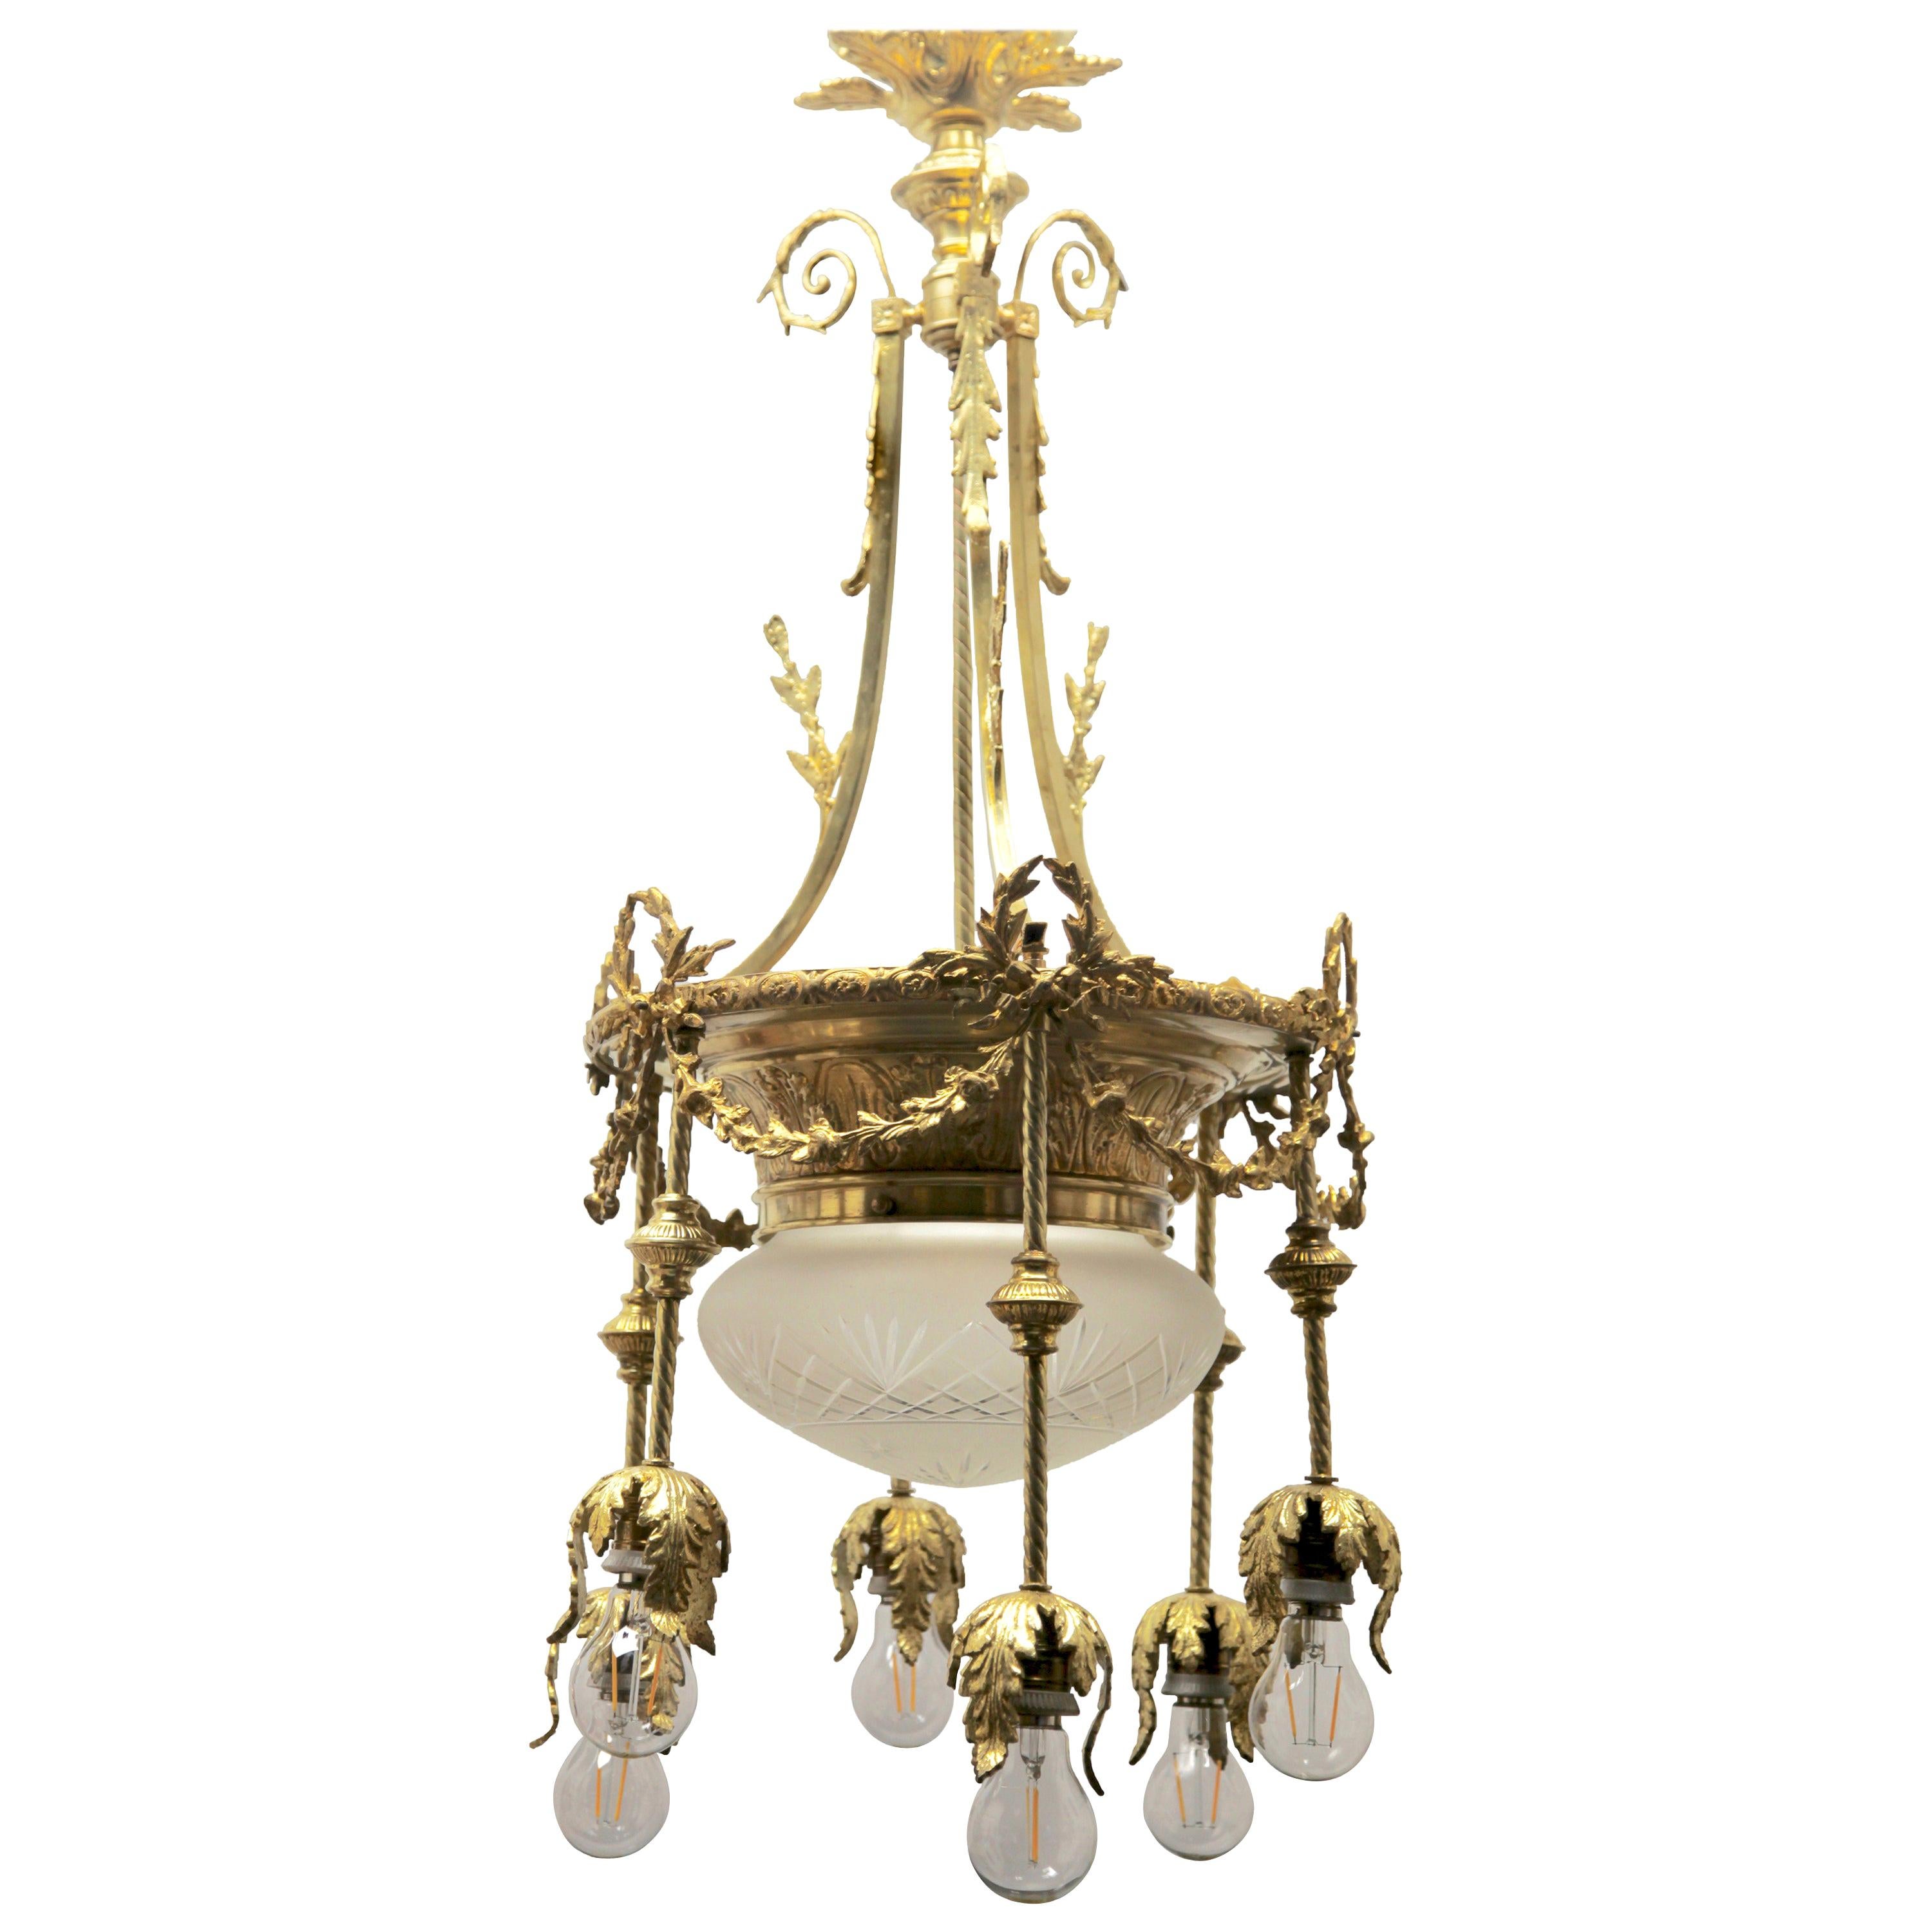 Pendant Chandelier Cast Brass with Six-Arms, Late 19th Century